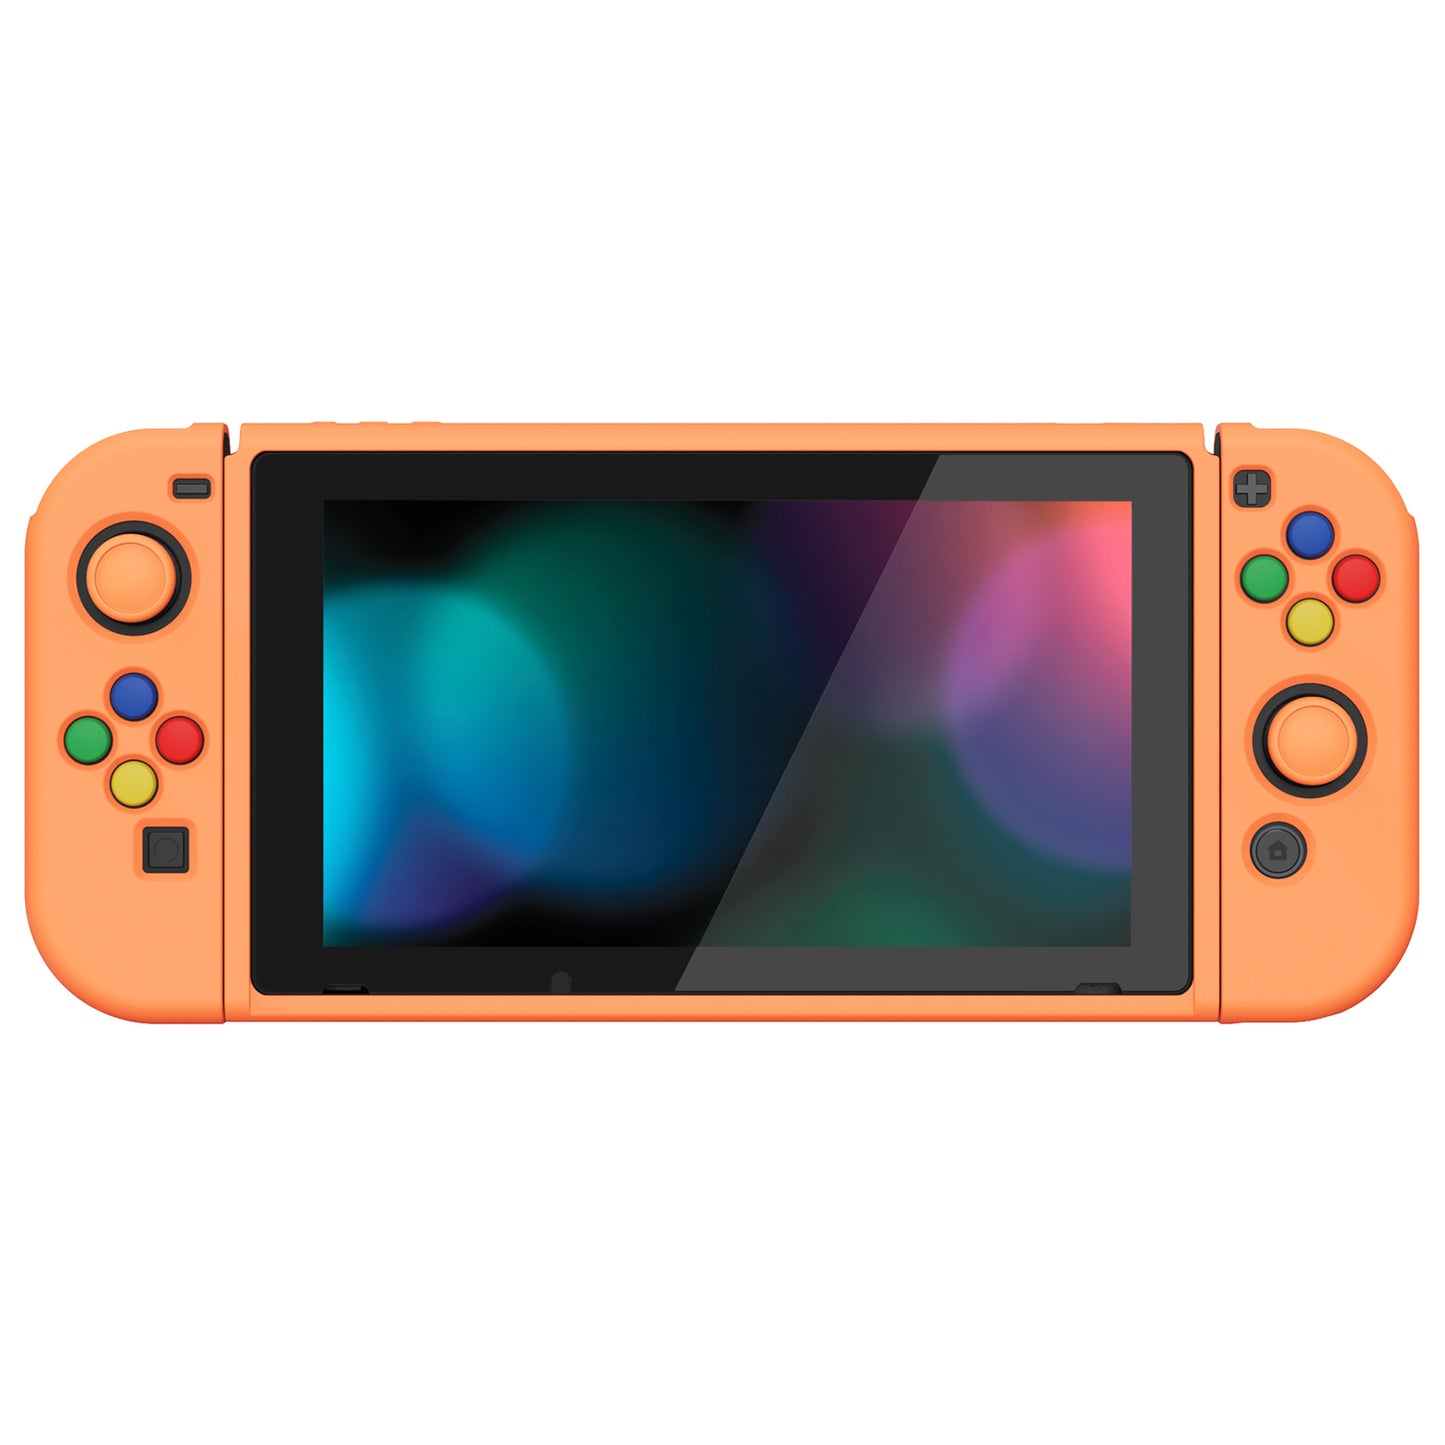 PlayVital ZealProtect Soft Protective Case for Nintendo Switch, Flexible Cover for Switch with Tempered Glass Screen Protector & Thumb Grips & ABXY Direction Button Caps - Apricot Yellow - RNSYM5012